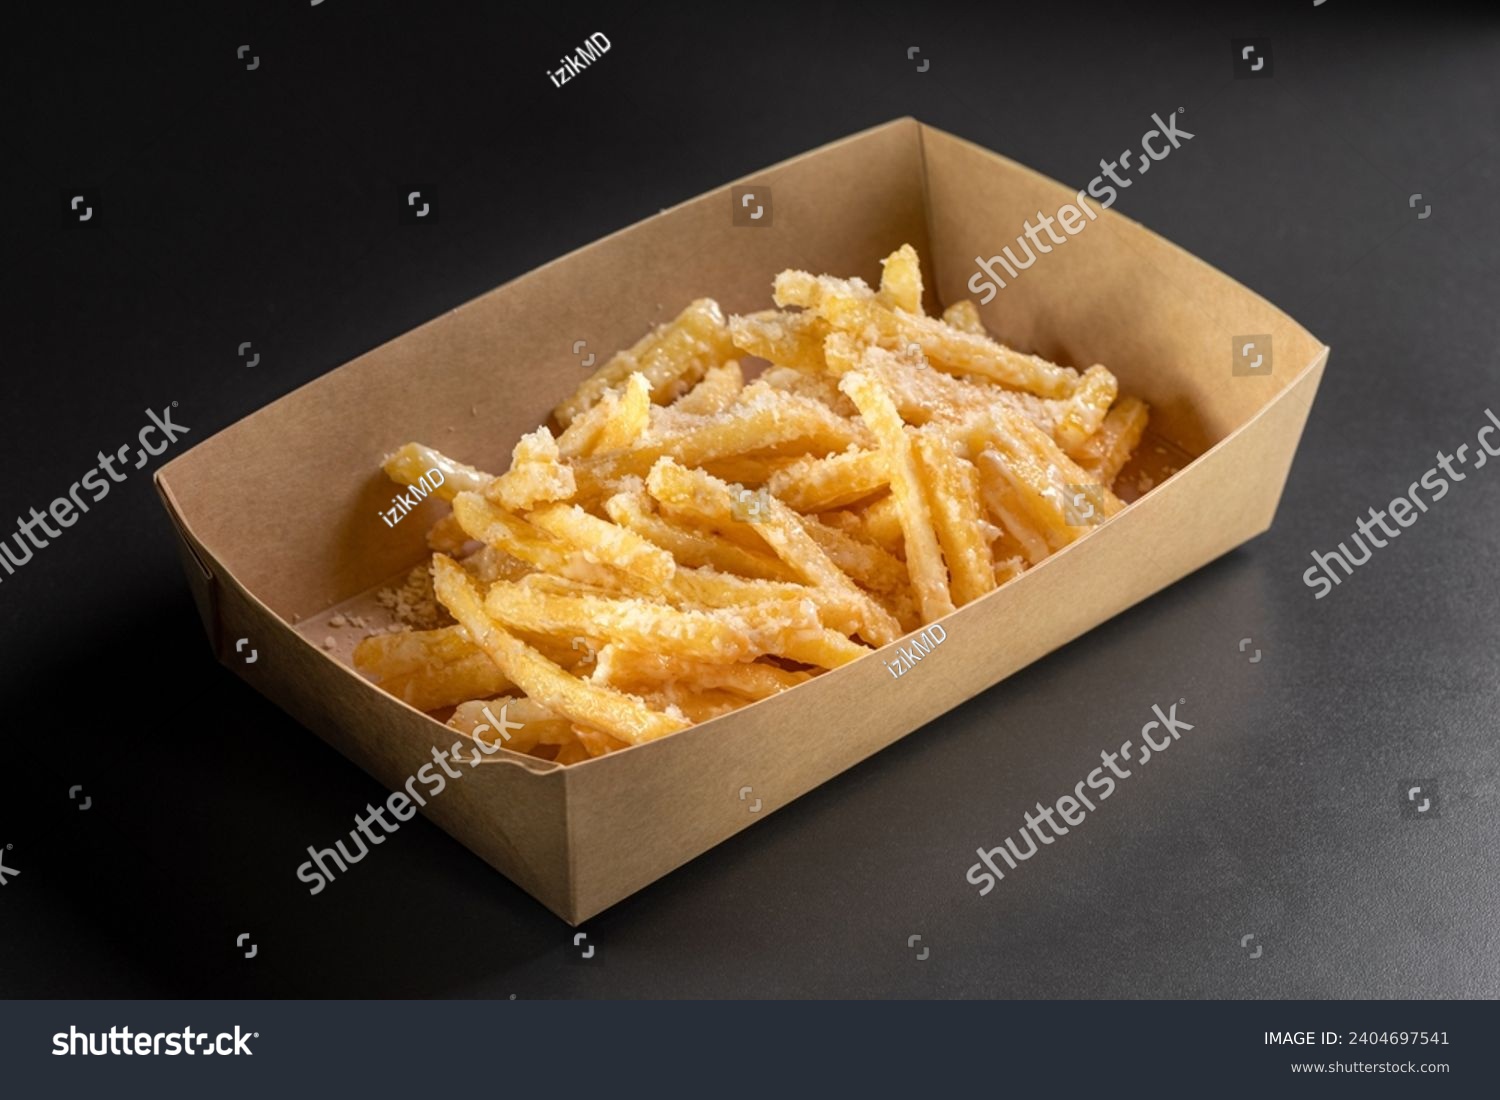 Delicious, tasty french fries topping with Parmesan cheese on top on a black background, in a container for delivery. Deep fry potato or appetizer, fast food. Dish of crisp golden potato chips. #2404697541